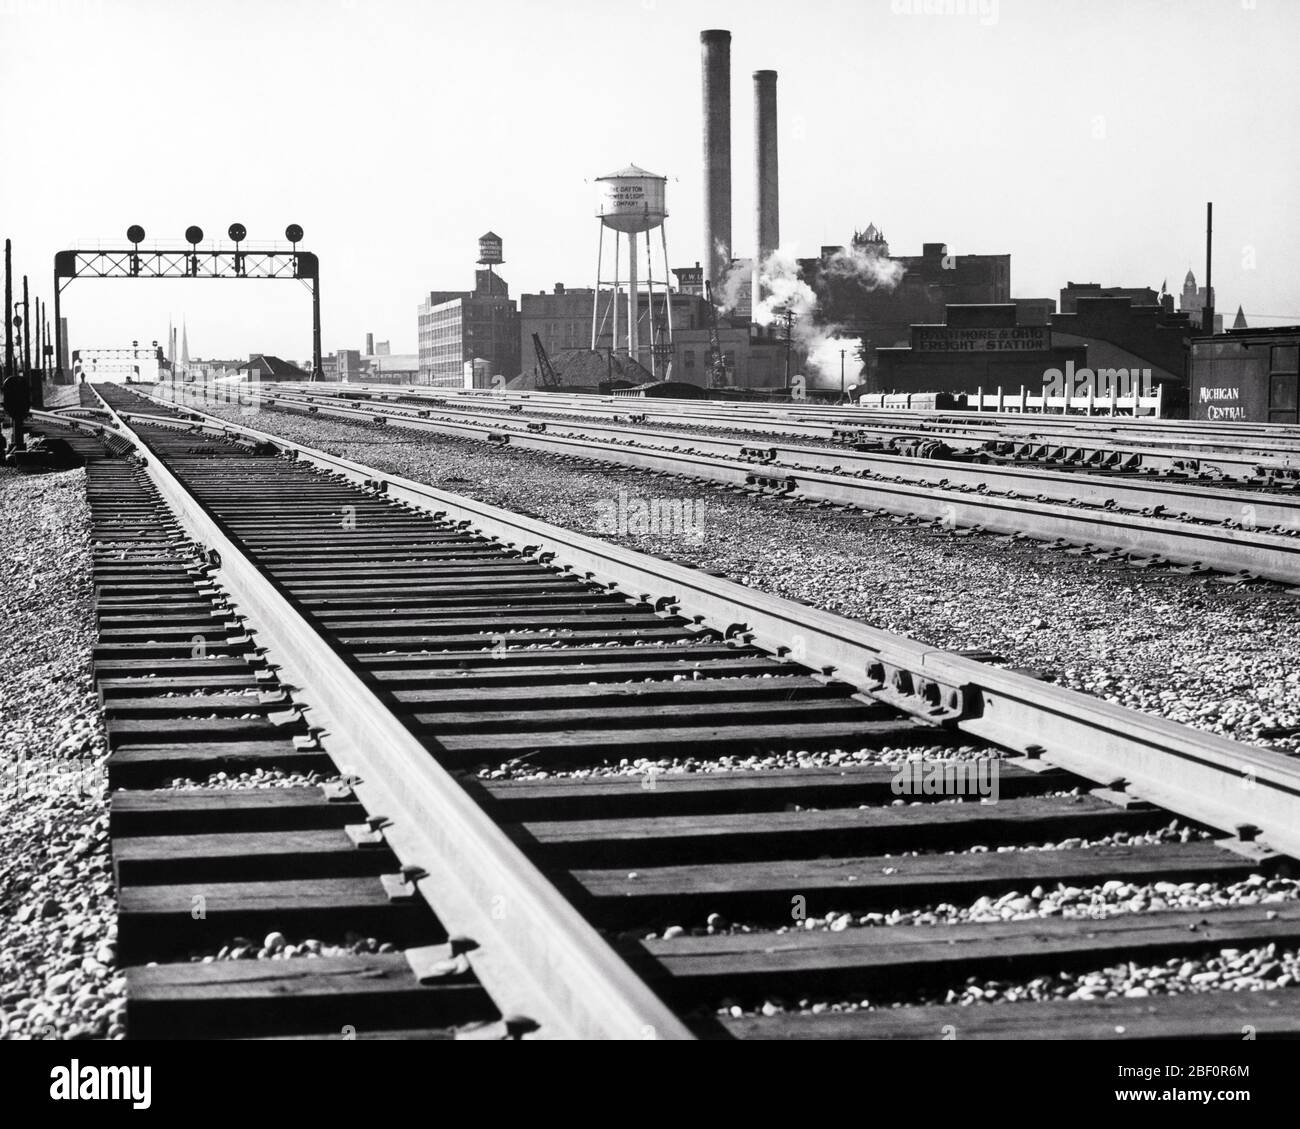 1960s WELL MAINTAINED RAILROAD TRACKS STEEL RAILS WOOD CROSS TIES SHARP BALLAST IN INDUSTRIAL FACTORY AREA OF DAYTON OHIO USA  - r4680 HAR001 HARS SPIKES CONCEPT CONNECTION CONCEPTUAL DAYTON RAILROADS SYMBOLIC CONCEPTS MAINLINE OH OHIO BLACK AND WHITE FACTORIES HAR001 MIDWEST OLD FASHIONED RAILS REPRESENTATION SMOKESTACKS Stock Photo